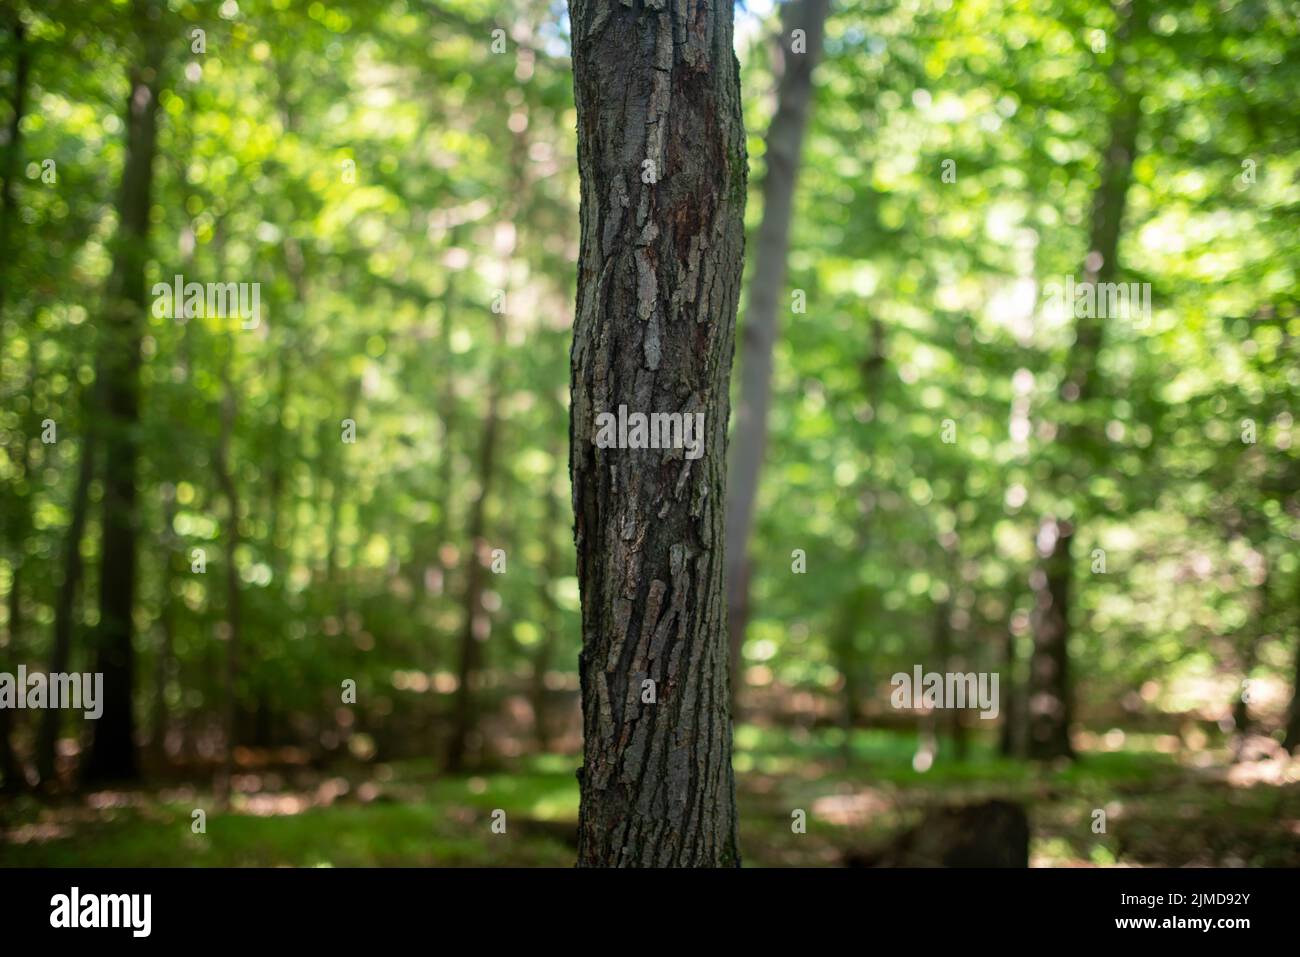 Rough textured tree trunk with idyllic green woodland background. Stock Photo